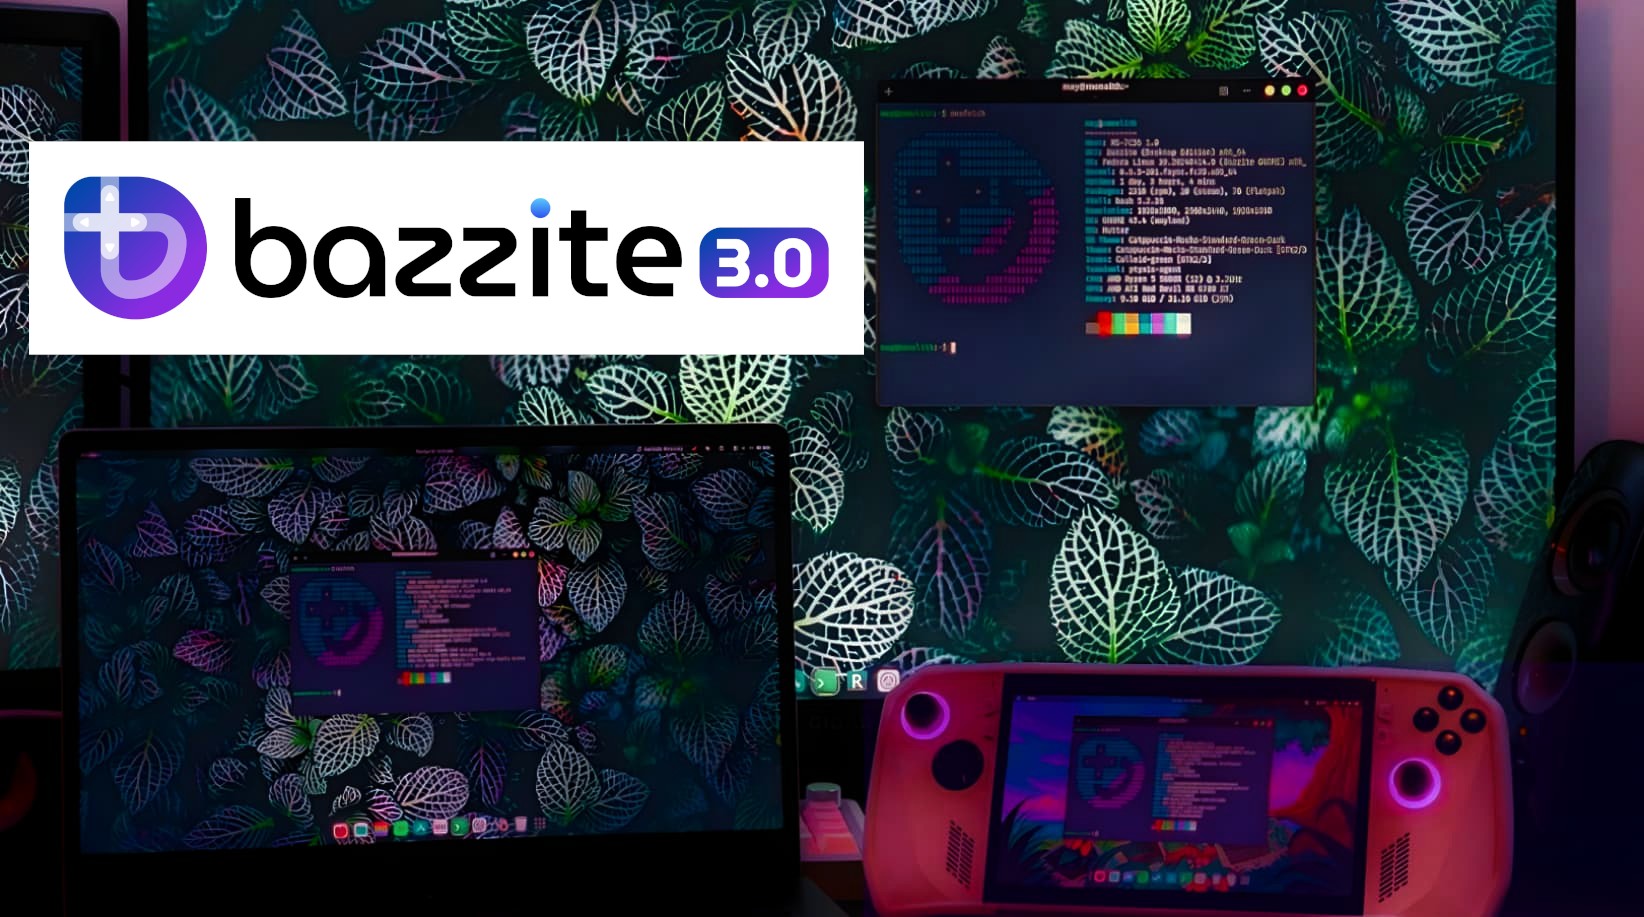 Bazzite 3.0: Linux OS update for games, improved support for Steam Deck OLED, Legion GO, Asus ROG Ally and other portable devices.